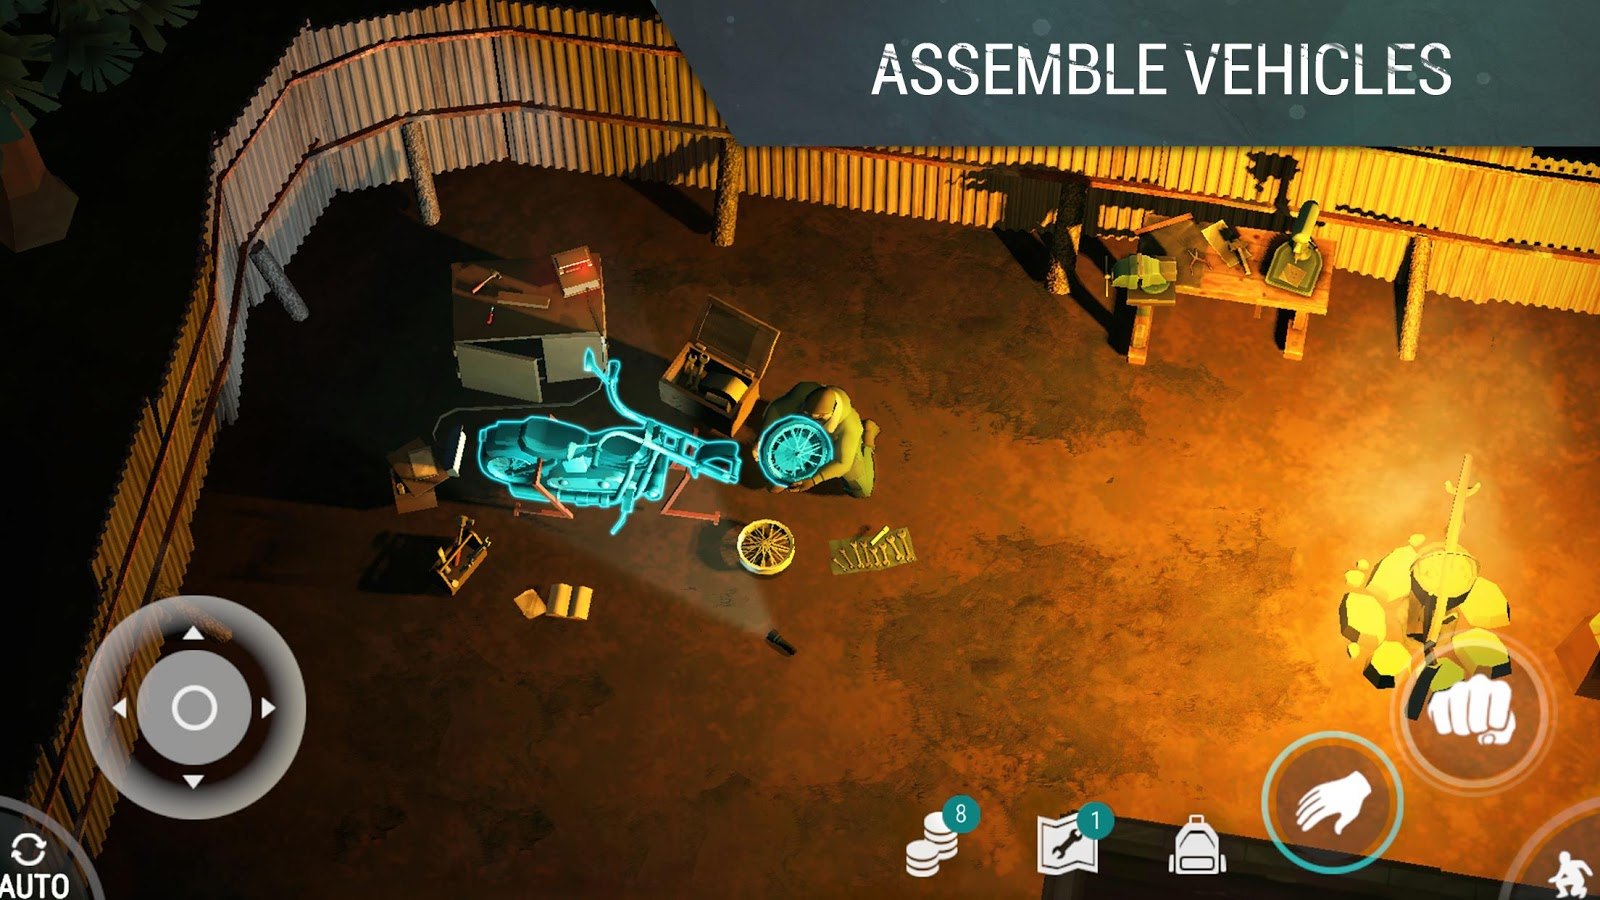 11 Best Survival Games For Android Android Apps For Me Download